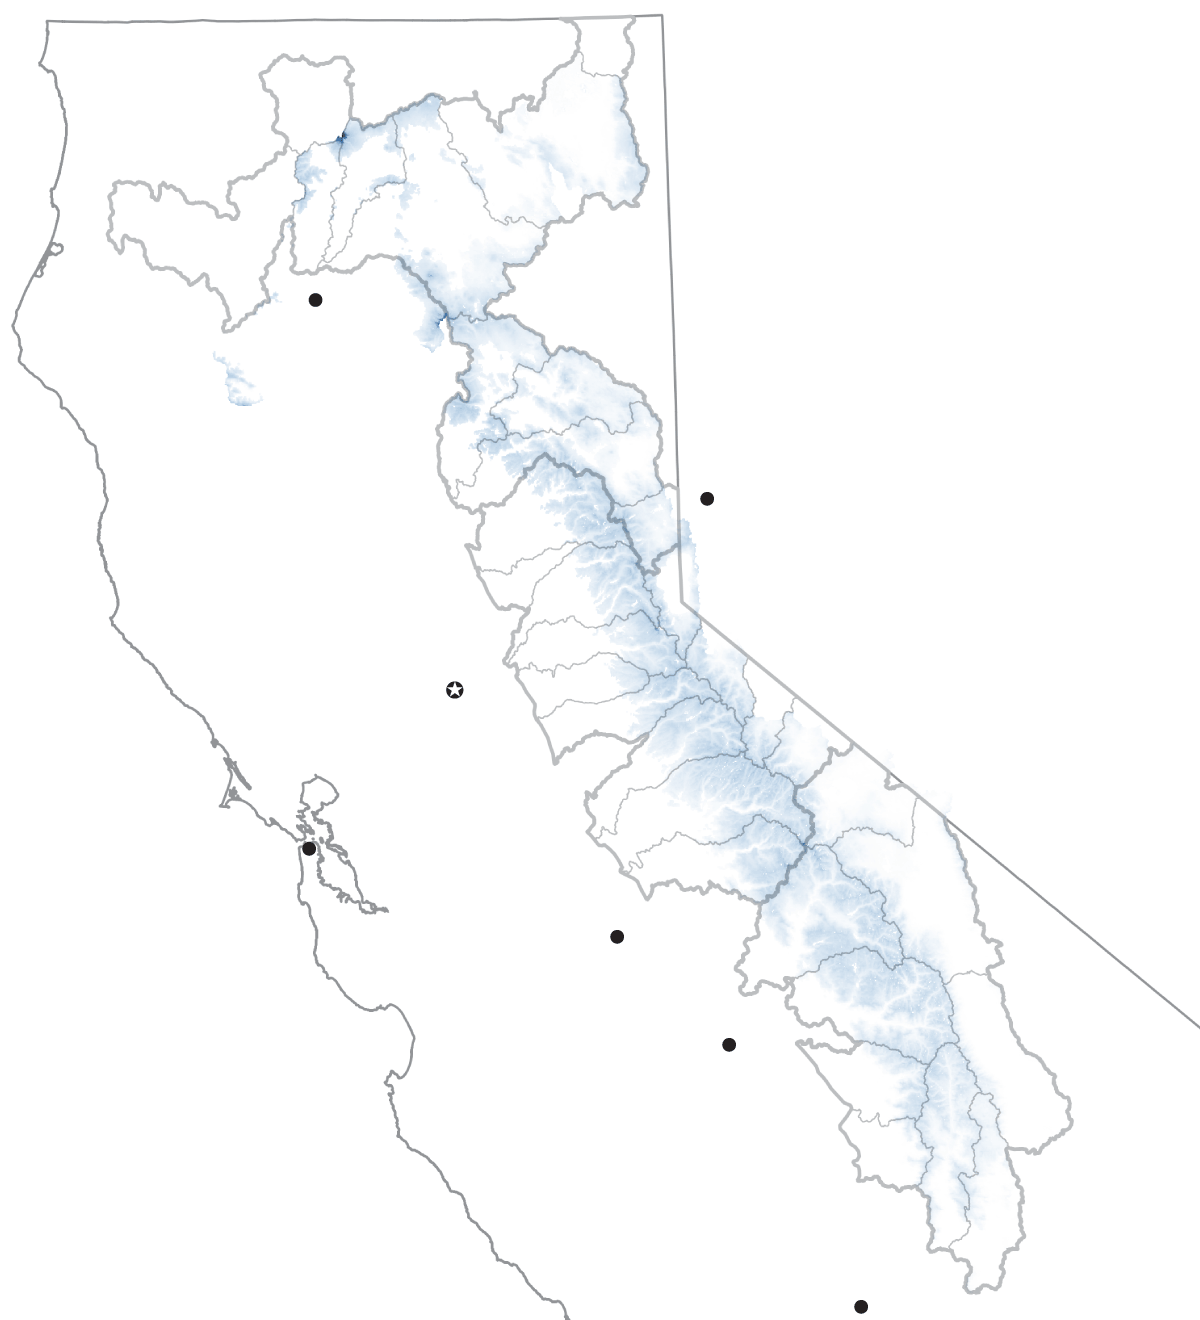 Maps show the extent of the Sierra snowpack compared to the historical average